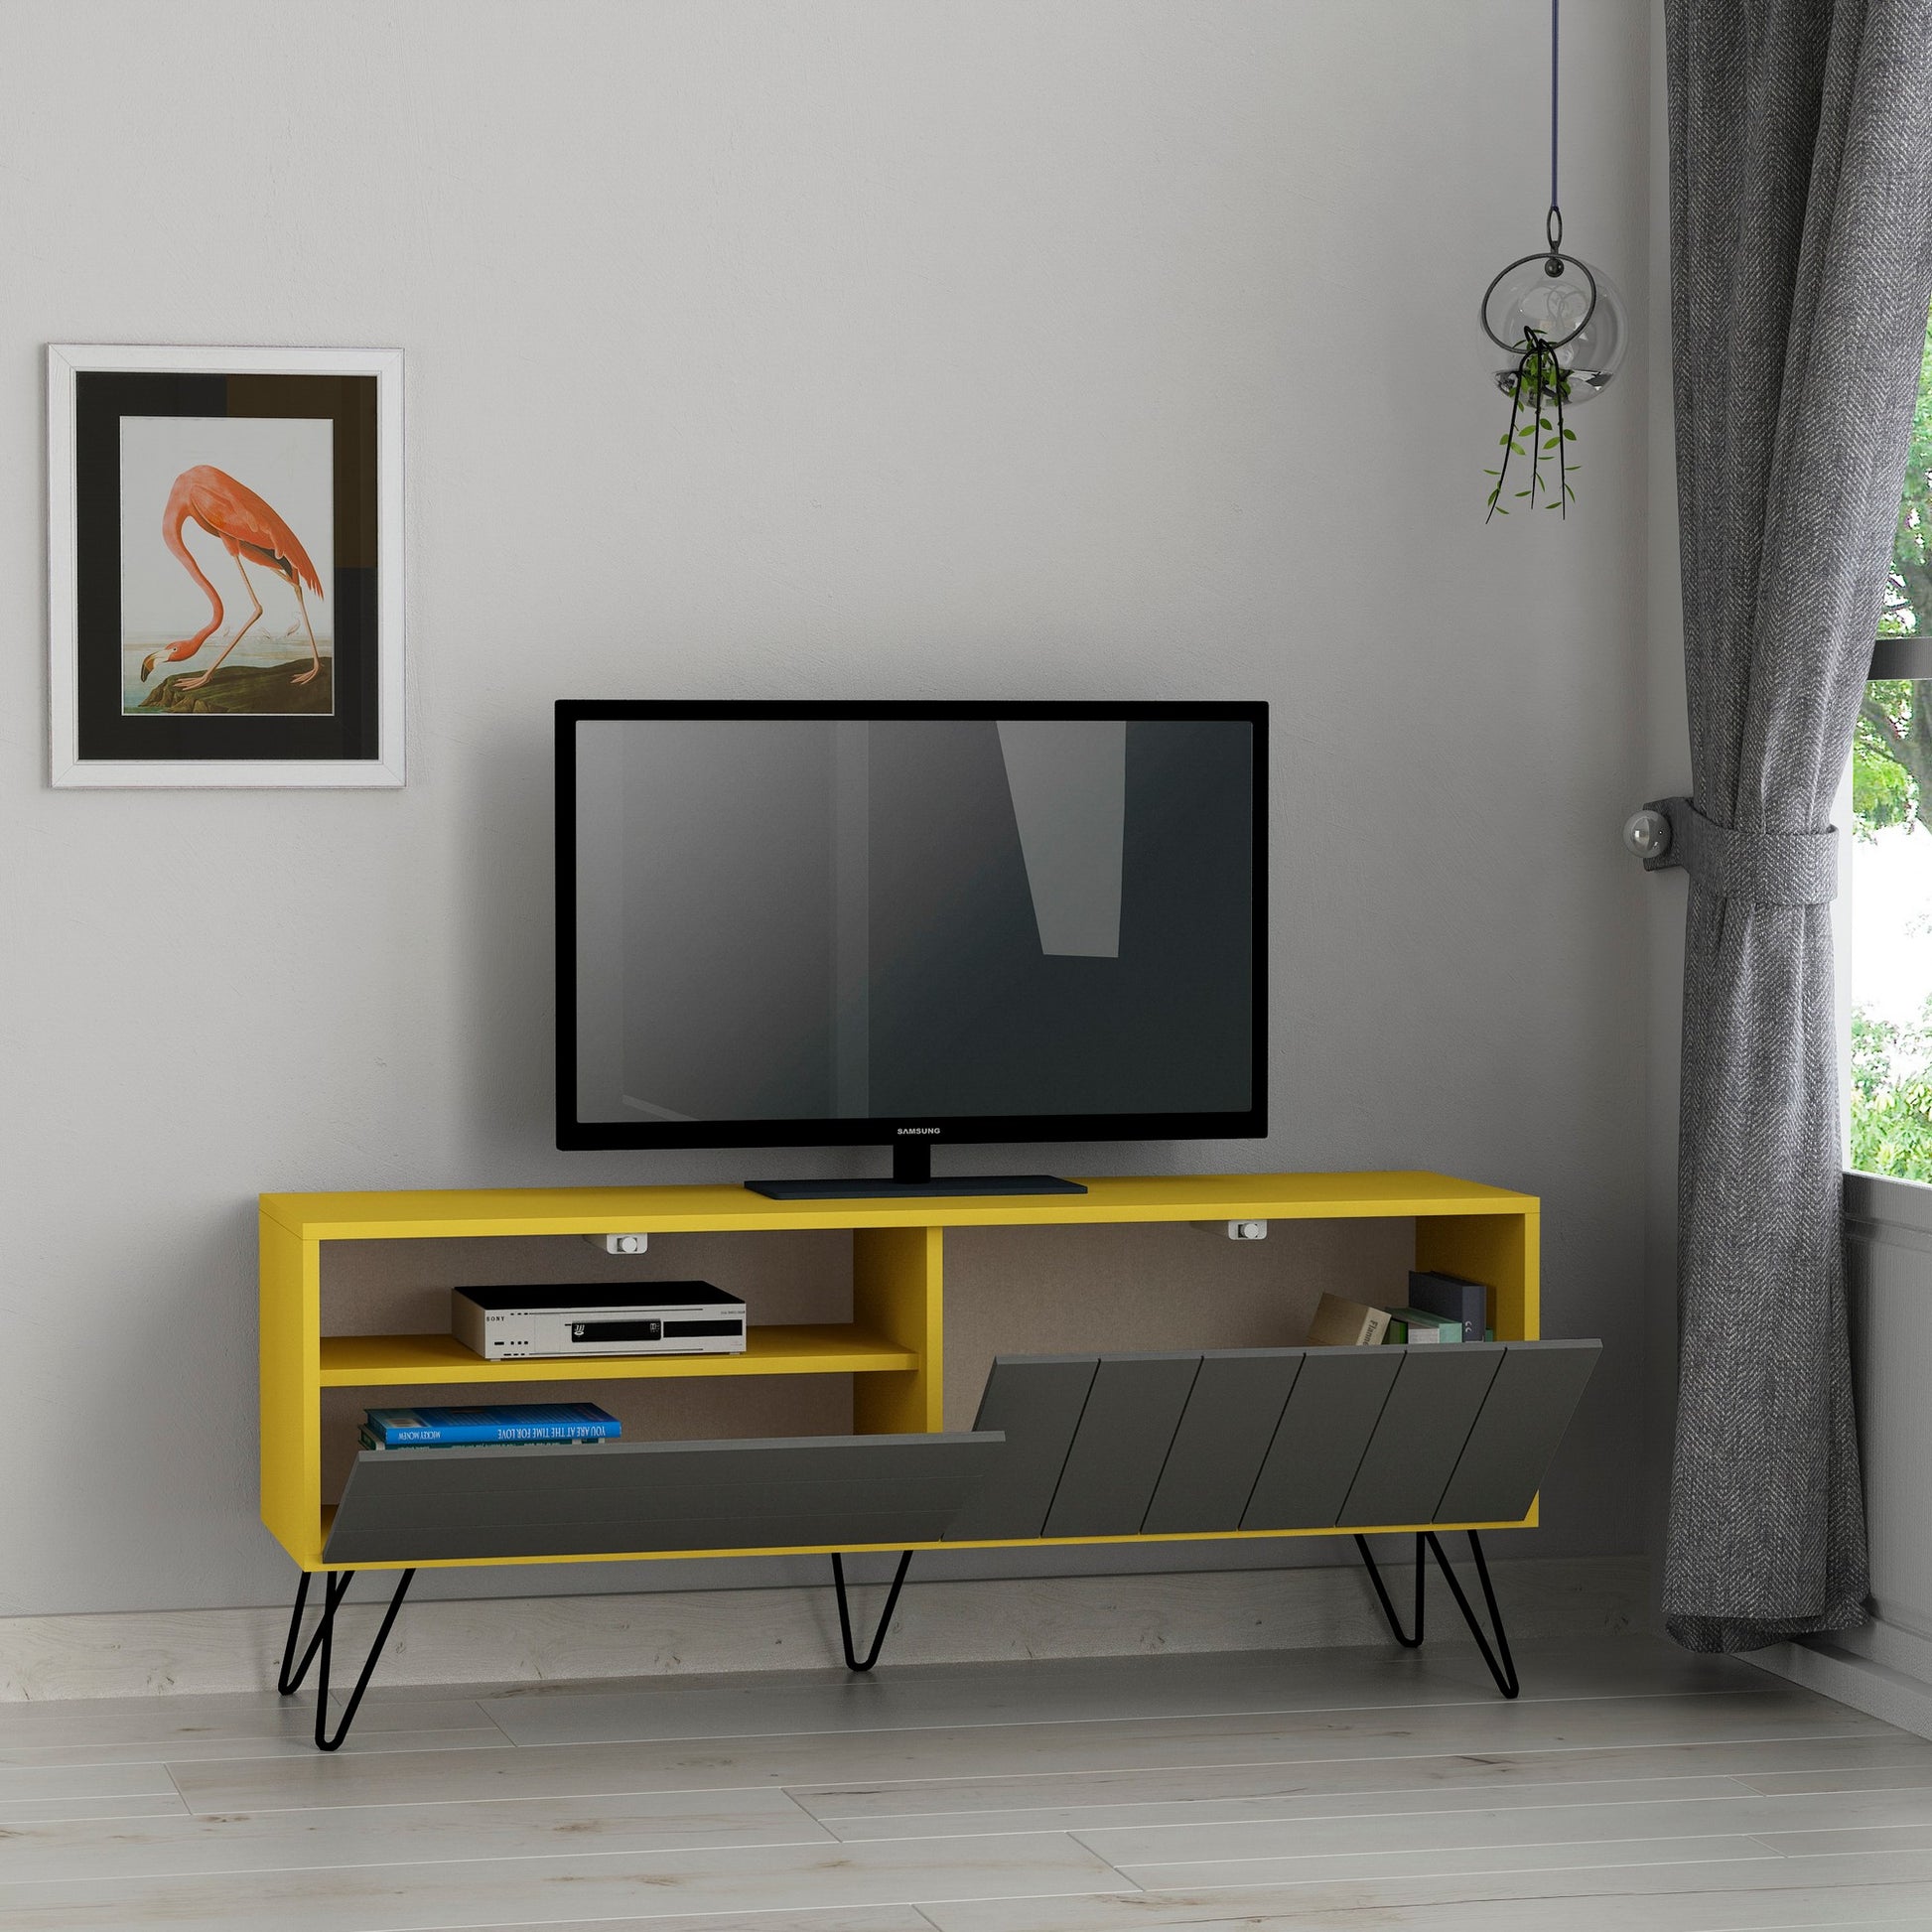 TAKK Picadilly Tv Stand - Mustard, Anthracite - NordlyHome.dk